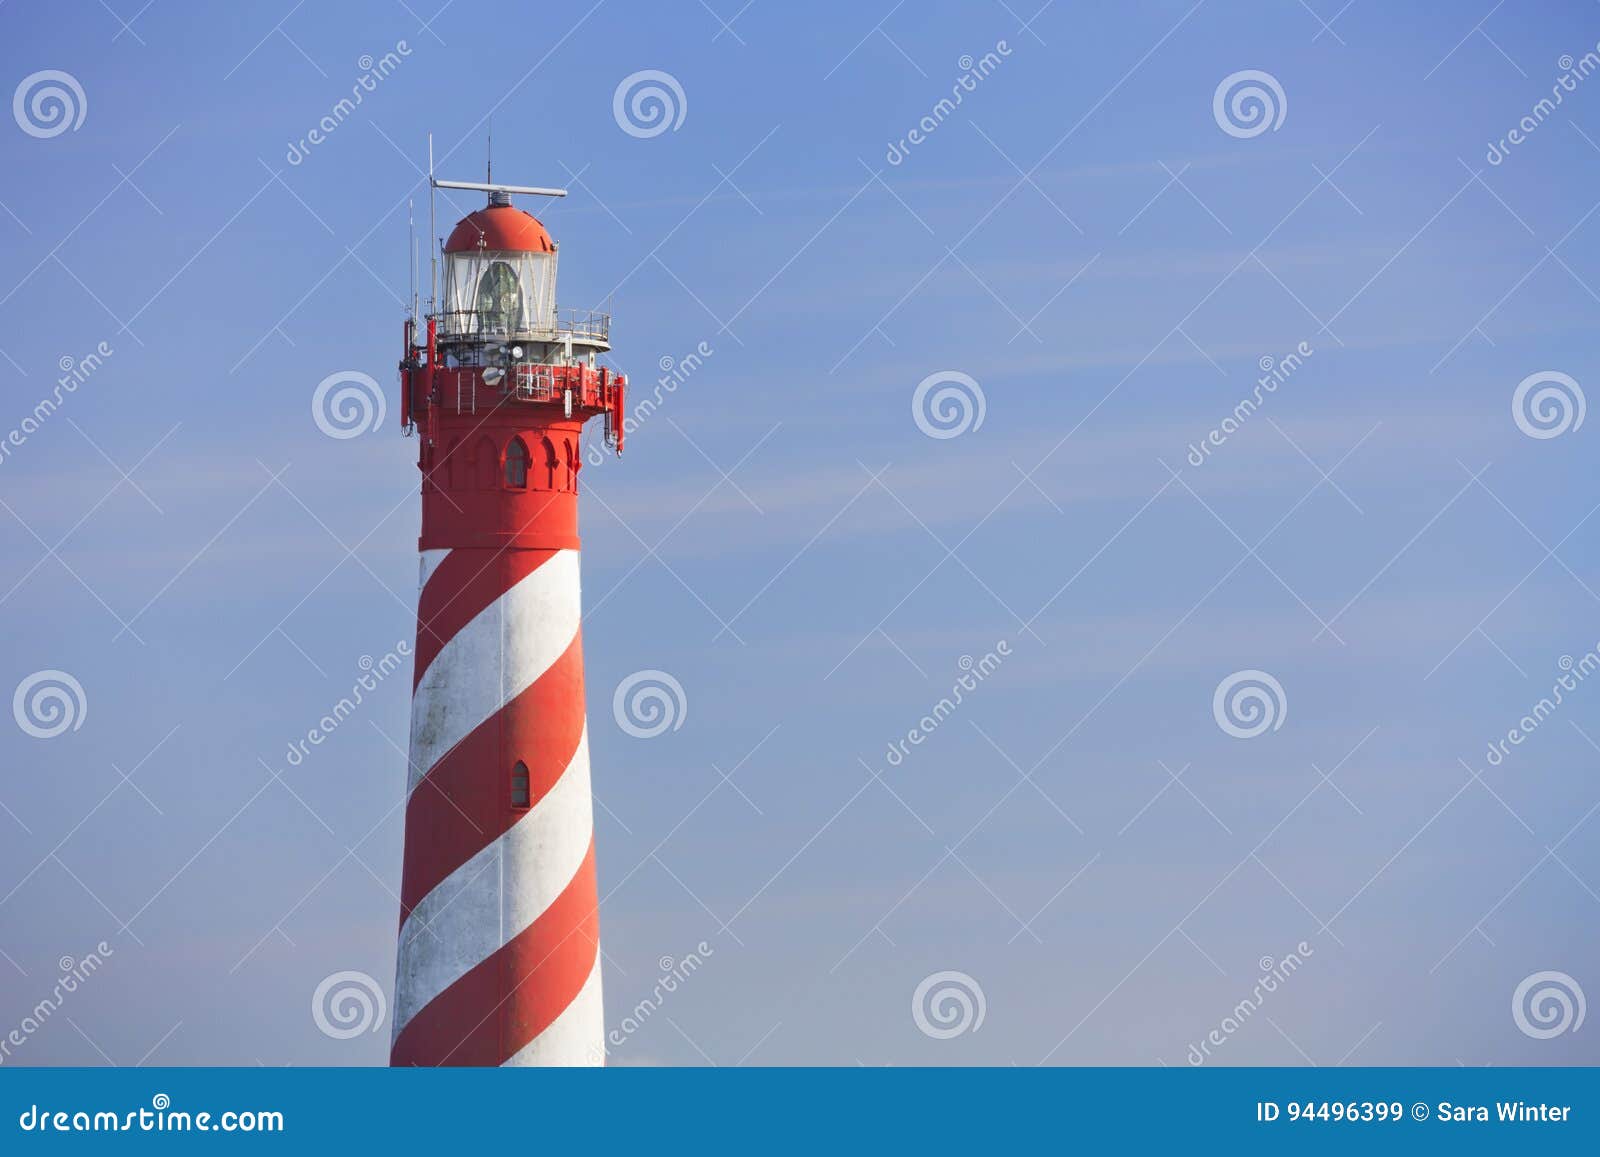 the lighthouse of haamstede in zeeland, the netherlands